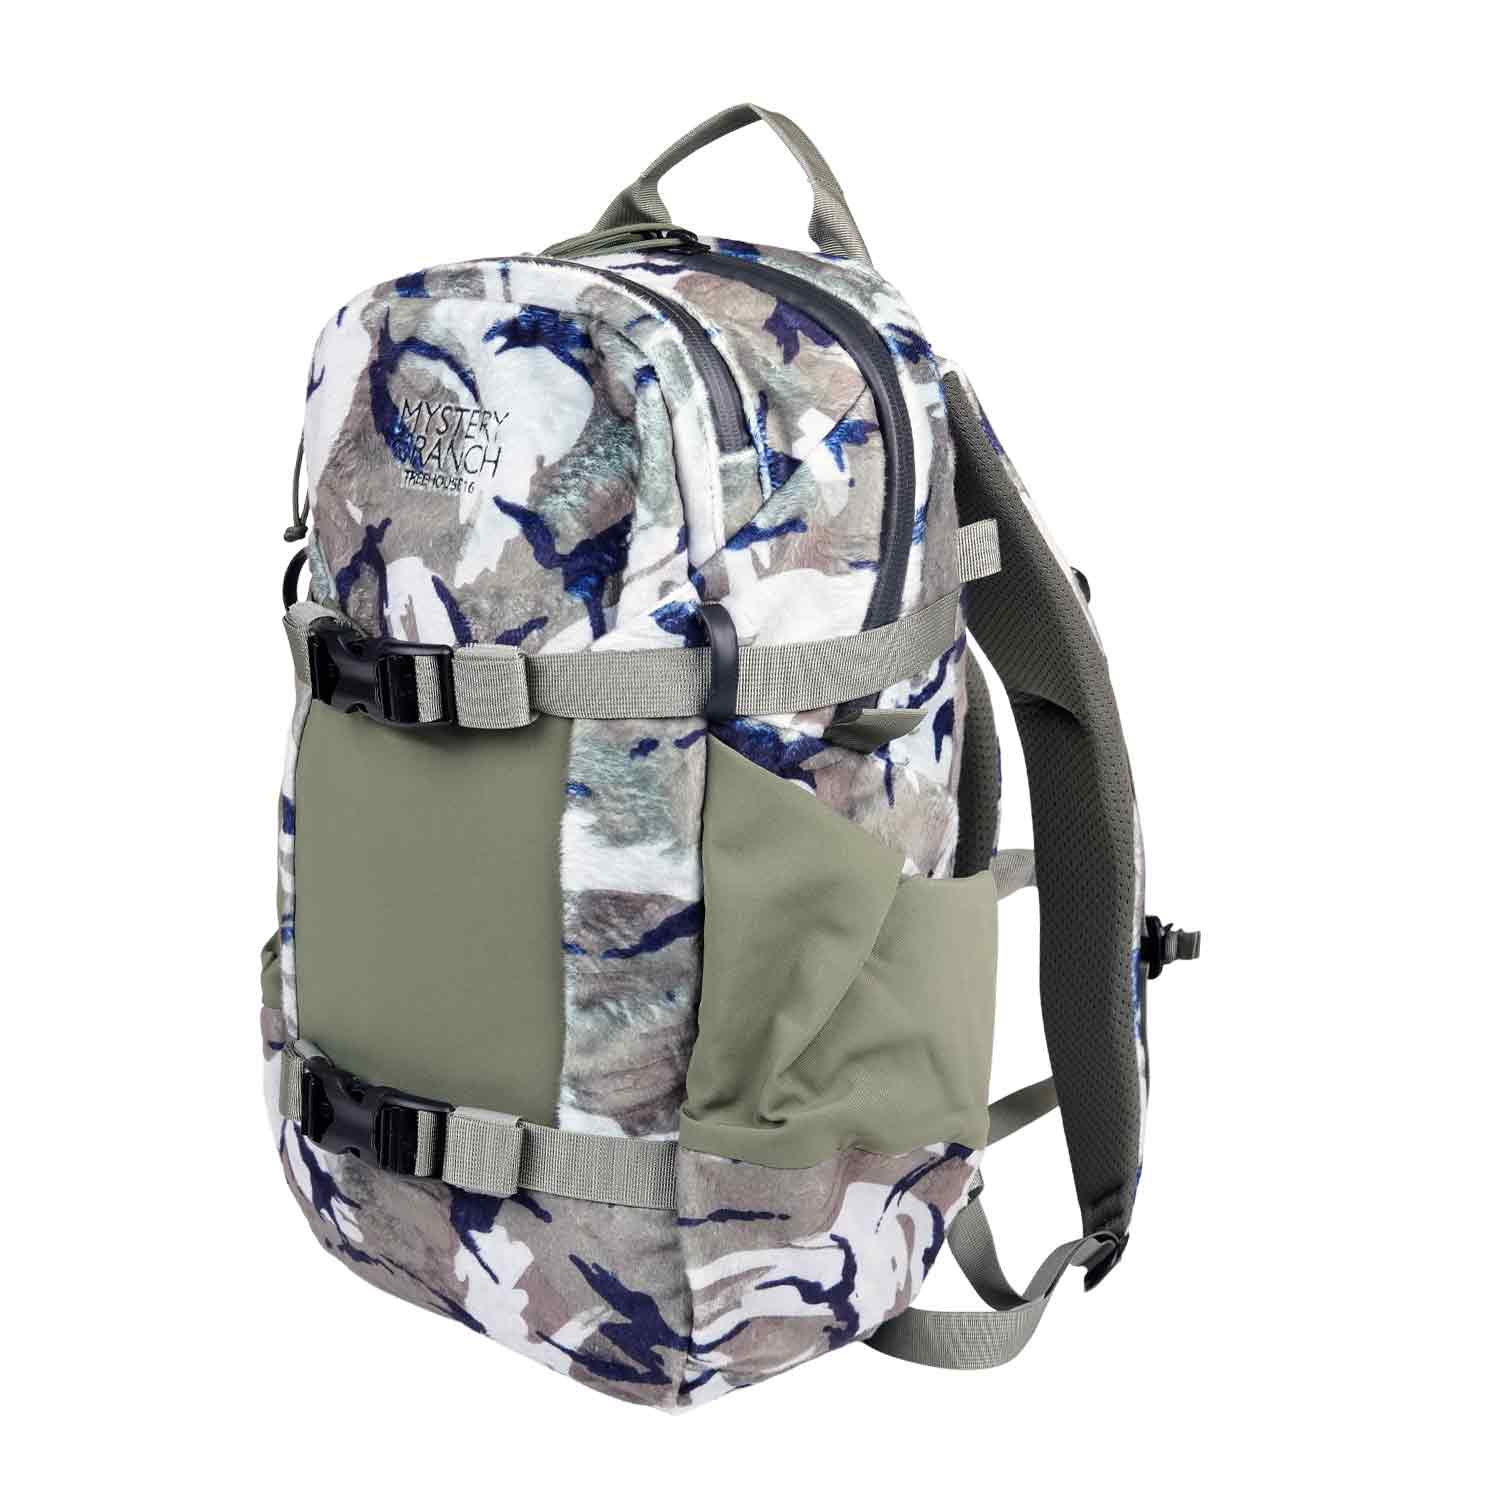 Mystery Ranch Treehouse 16 Whitetail Pack